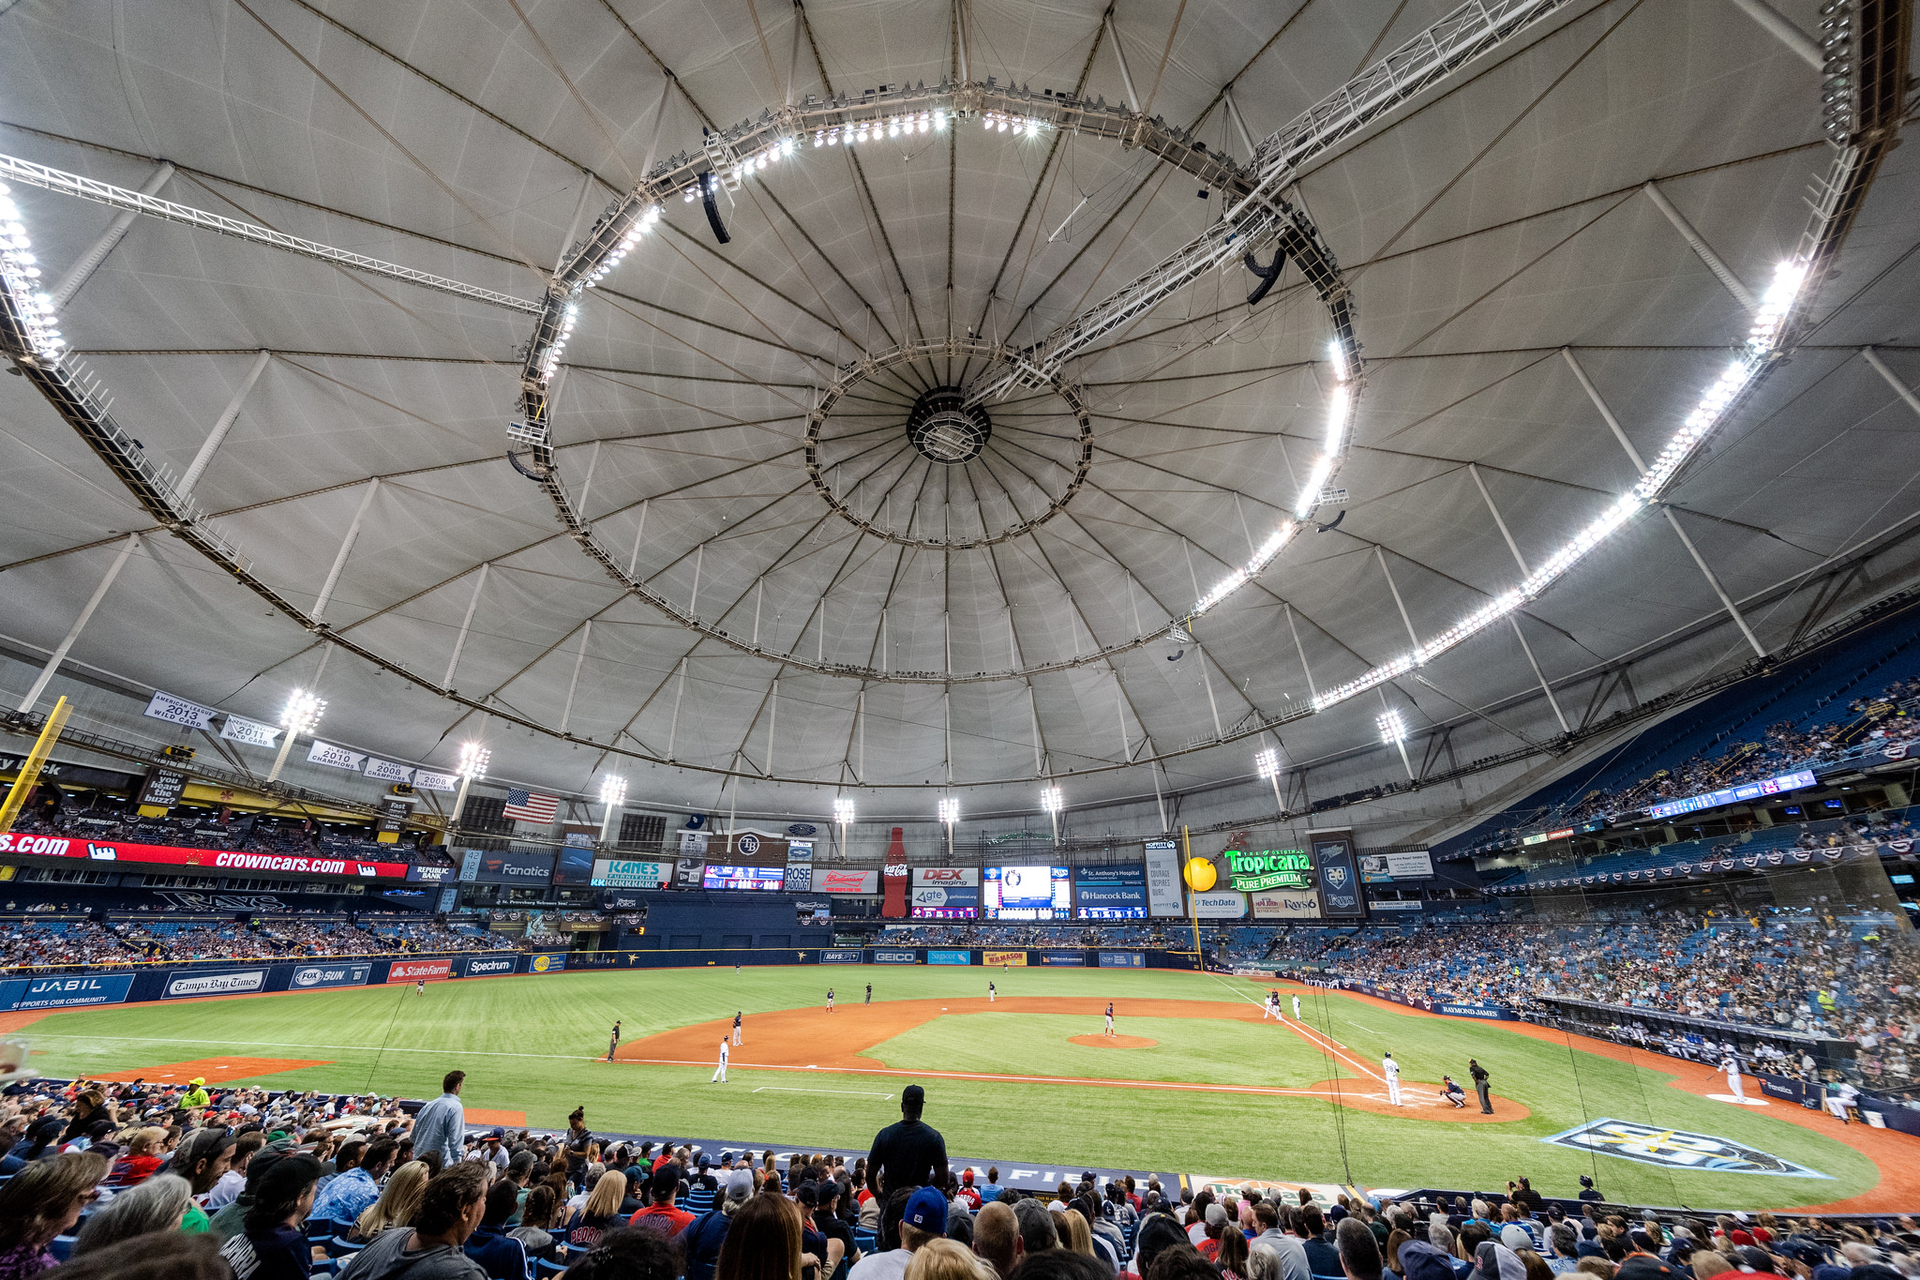 Tampa Bay Rays to renovate Tropicana Field, reduce seating - Tampa